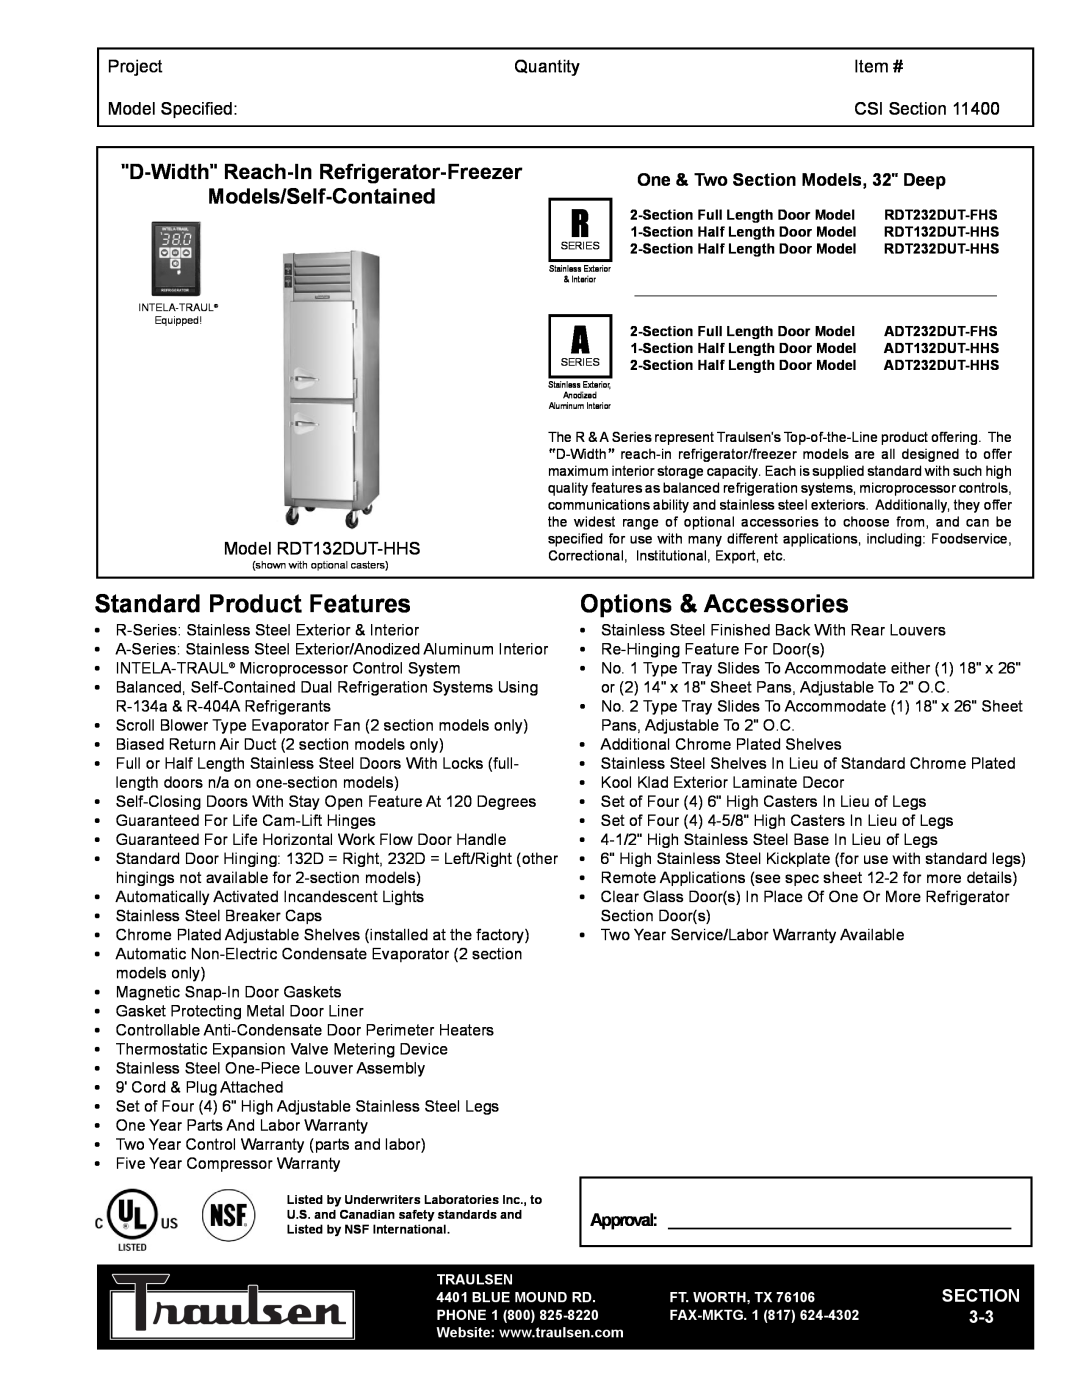 Traulsen RDT132DUT-HHS warranty D-Width Reach-In Refrigerator-Freezer, Models/Self-Contained, Project, Quantity, Item # 